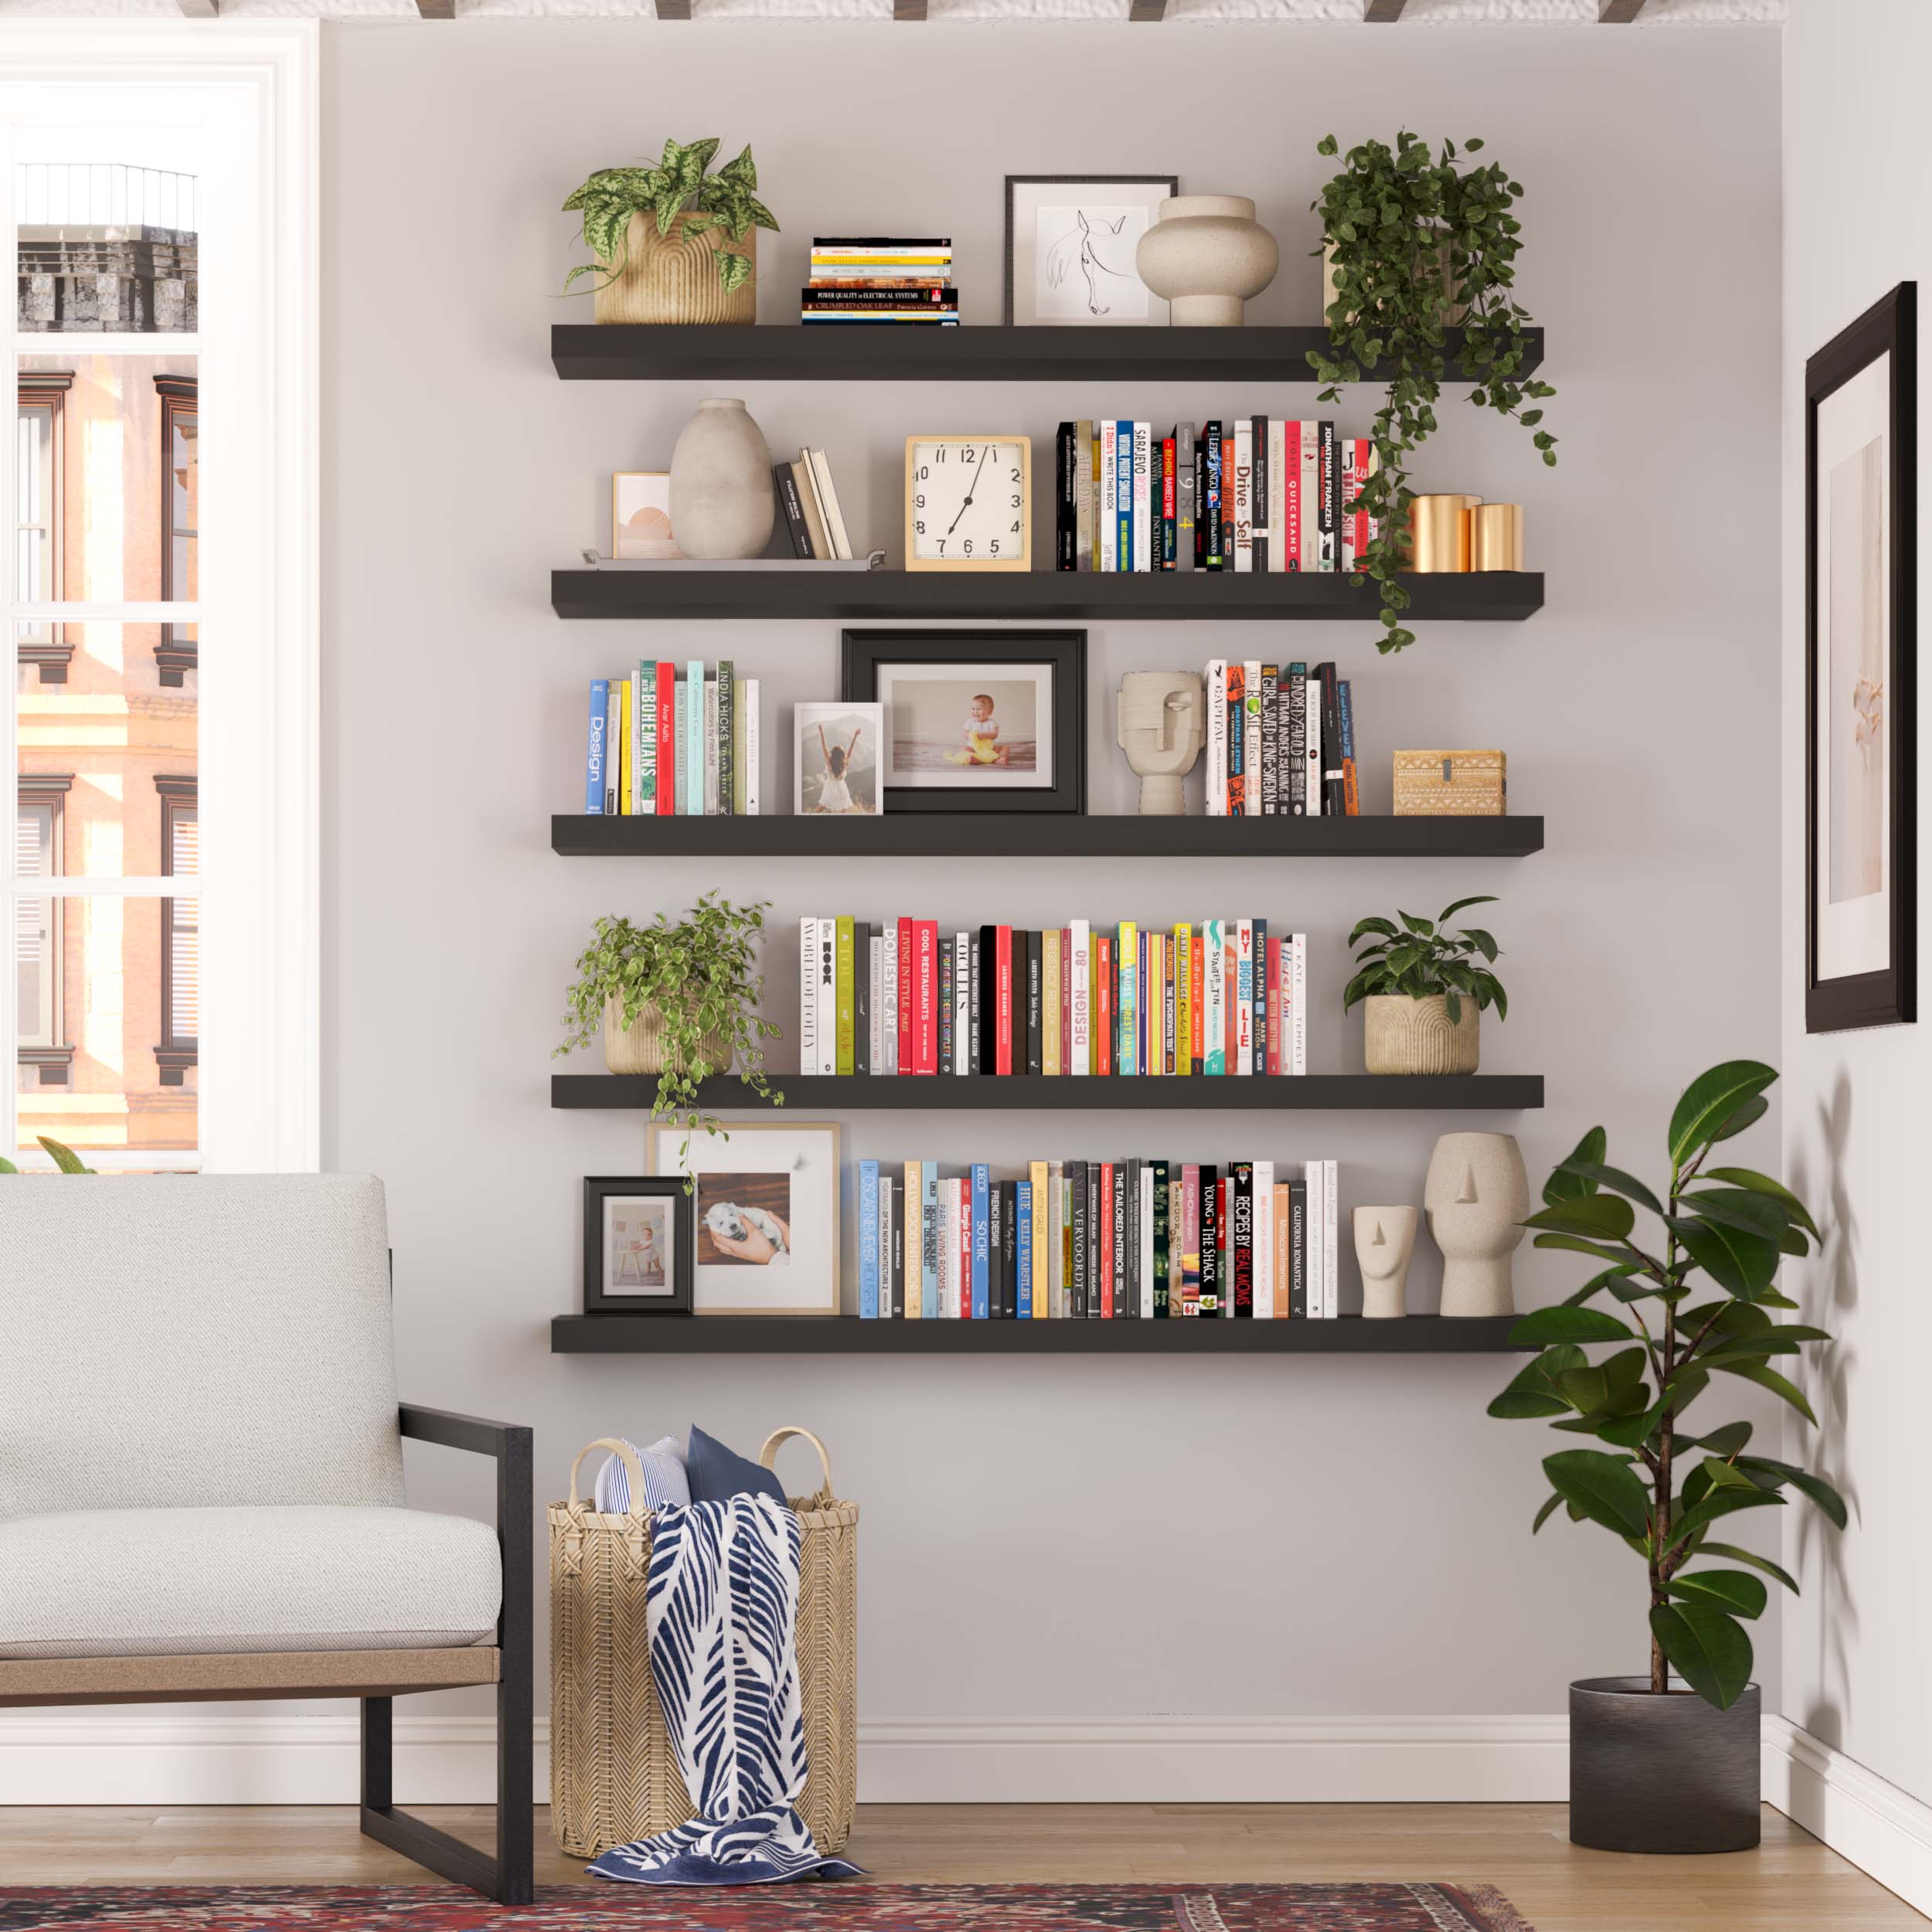 Elegant wall storage shelves black filled with books and decorative items, creating a sophisticated and inviting home library atmosphere.